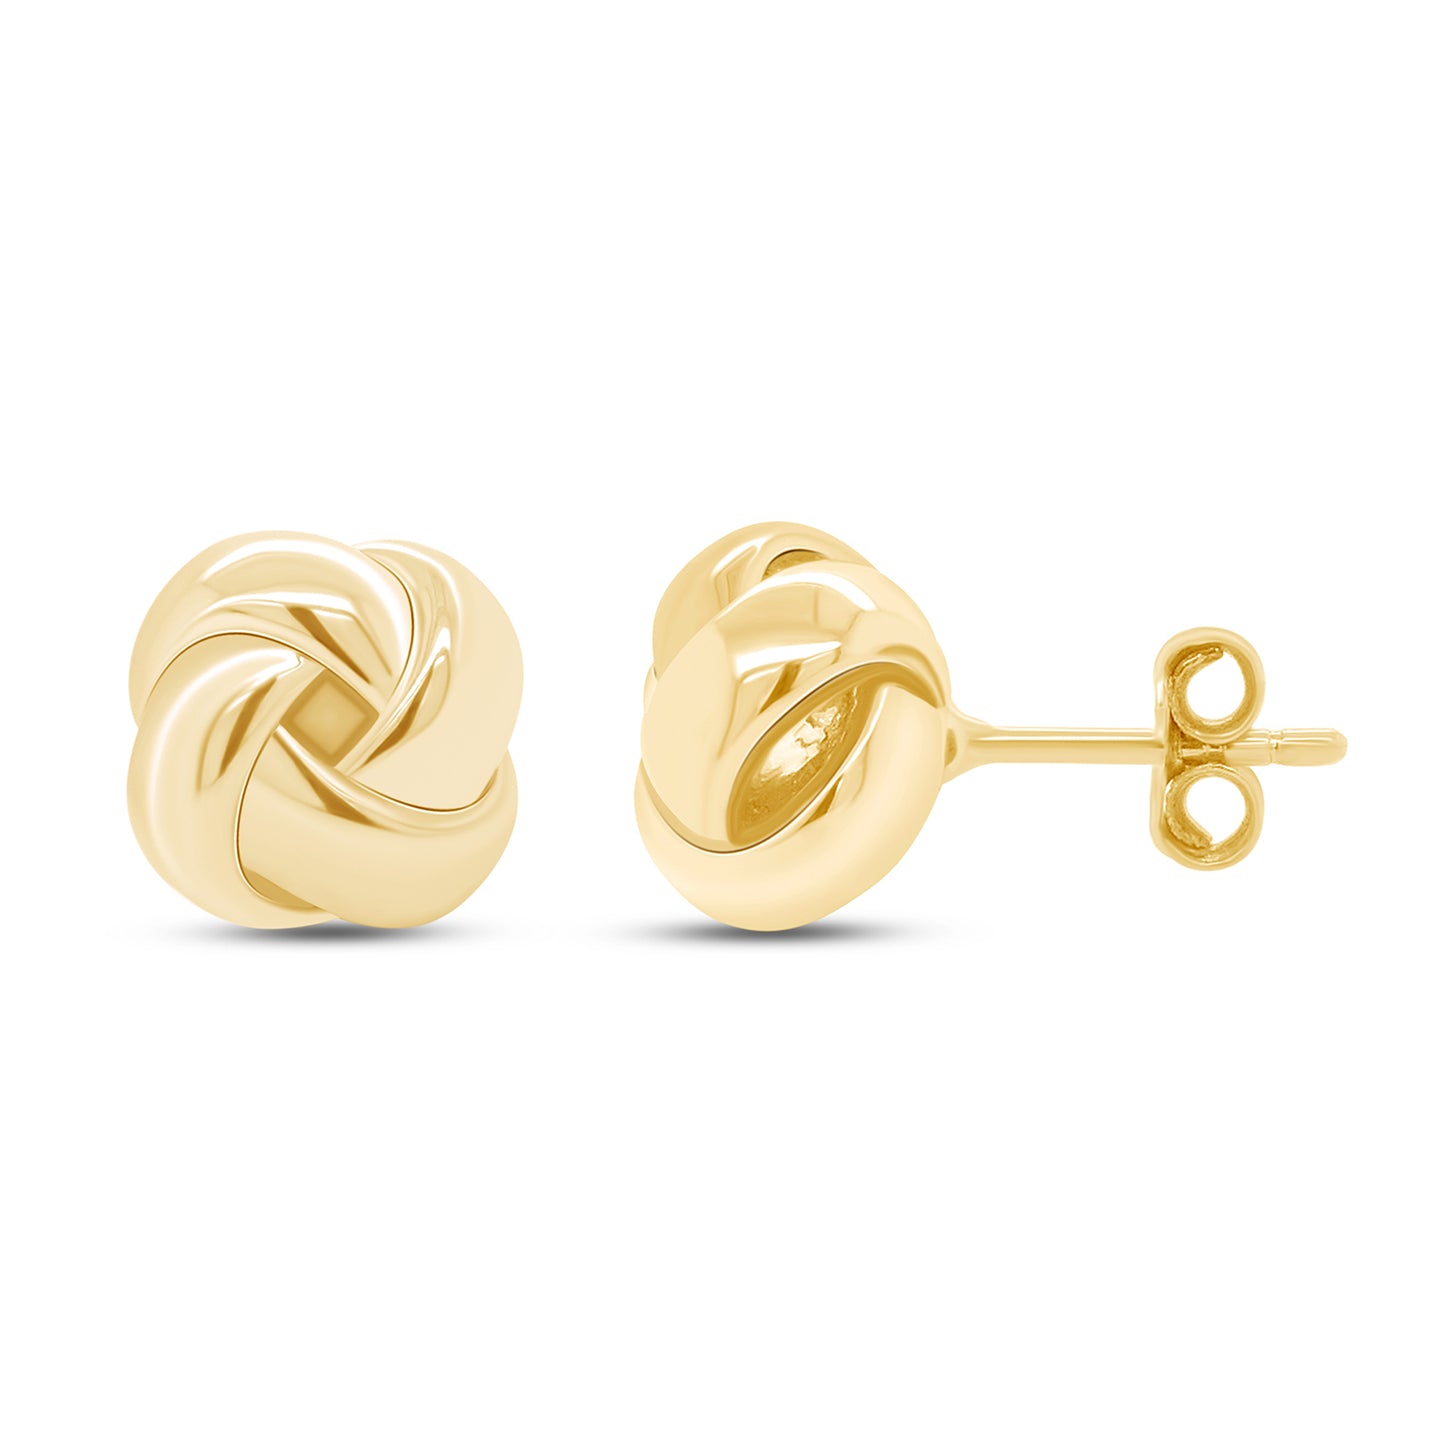 Love Knot Stud Earrings Jewelry for Women in 925 Sterling Silver with Push Back